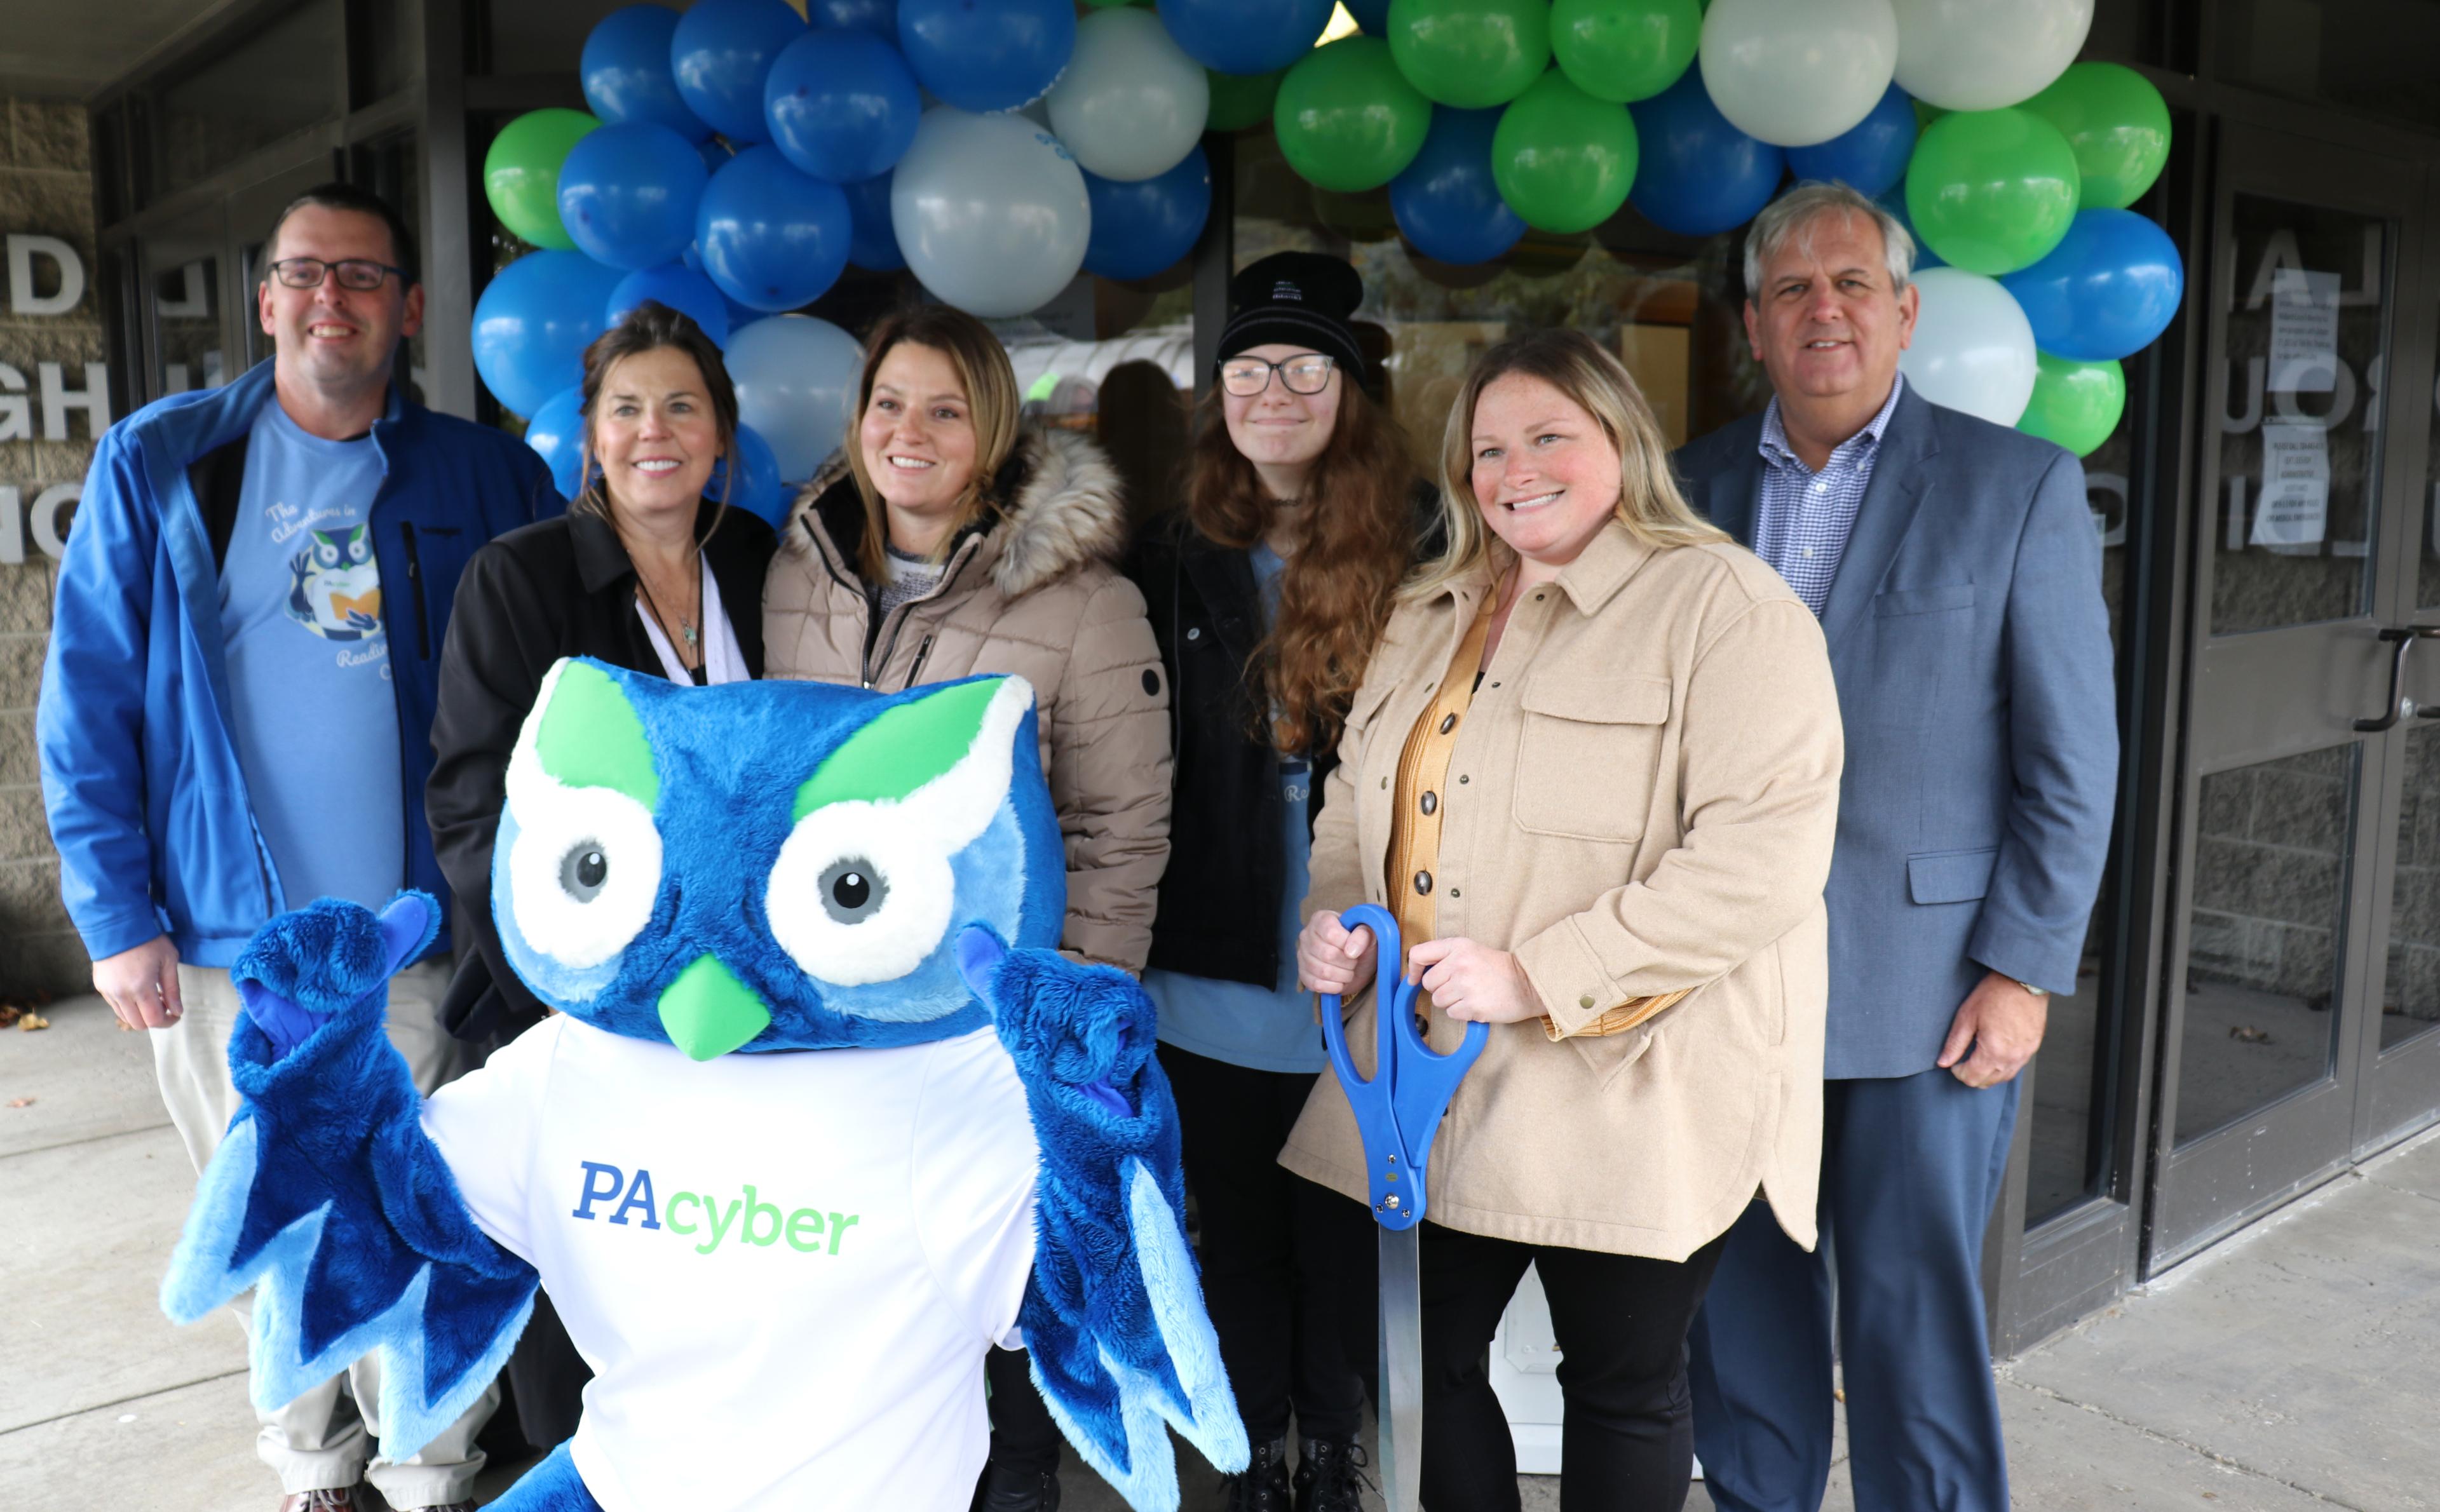 Six PA Cyber employees pose with mascot Archie the Owl in front of balloons.